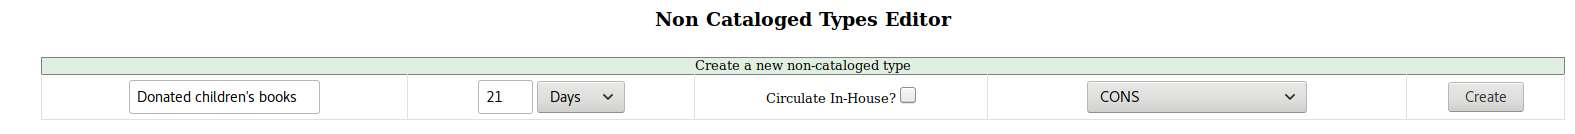 Form titled 'Non Cataloged Types Editor' for creating a new non-cataloged type. Fields: name ('Donated children’s books')